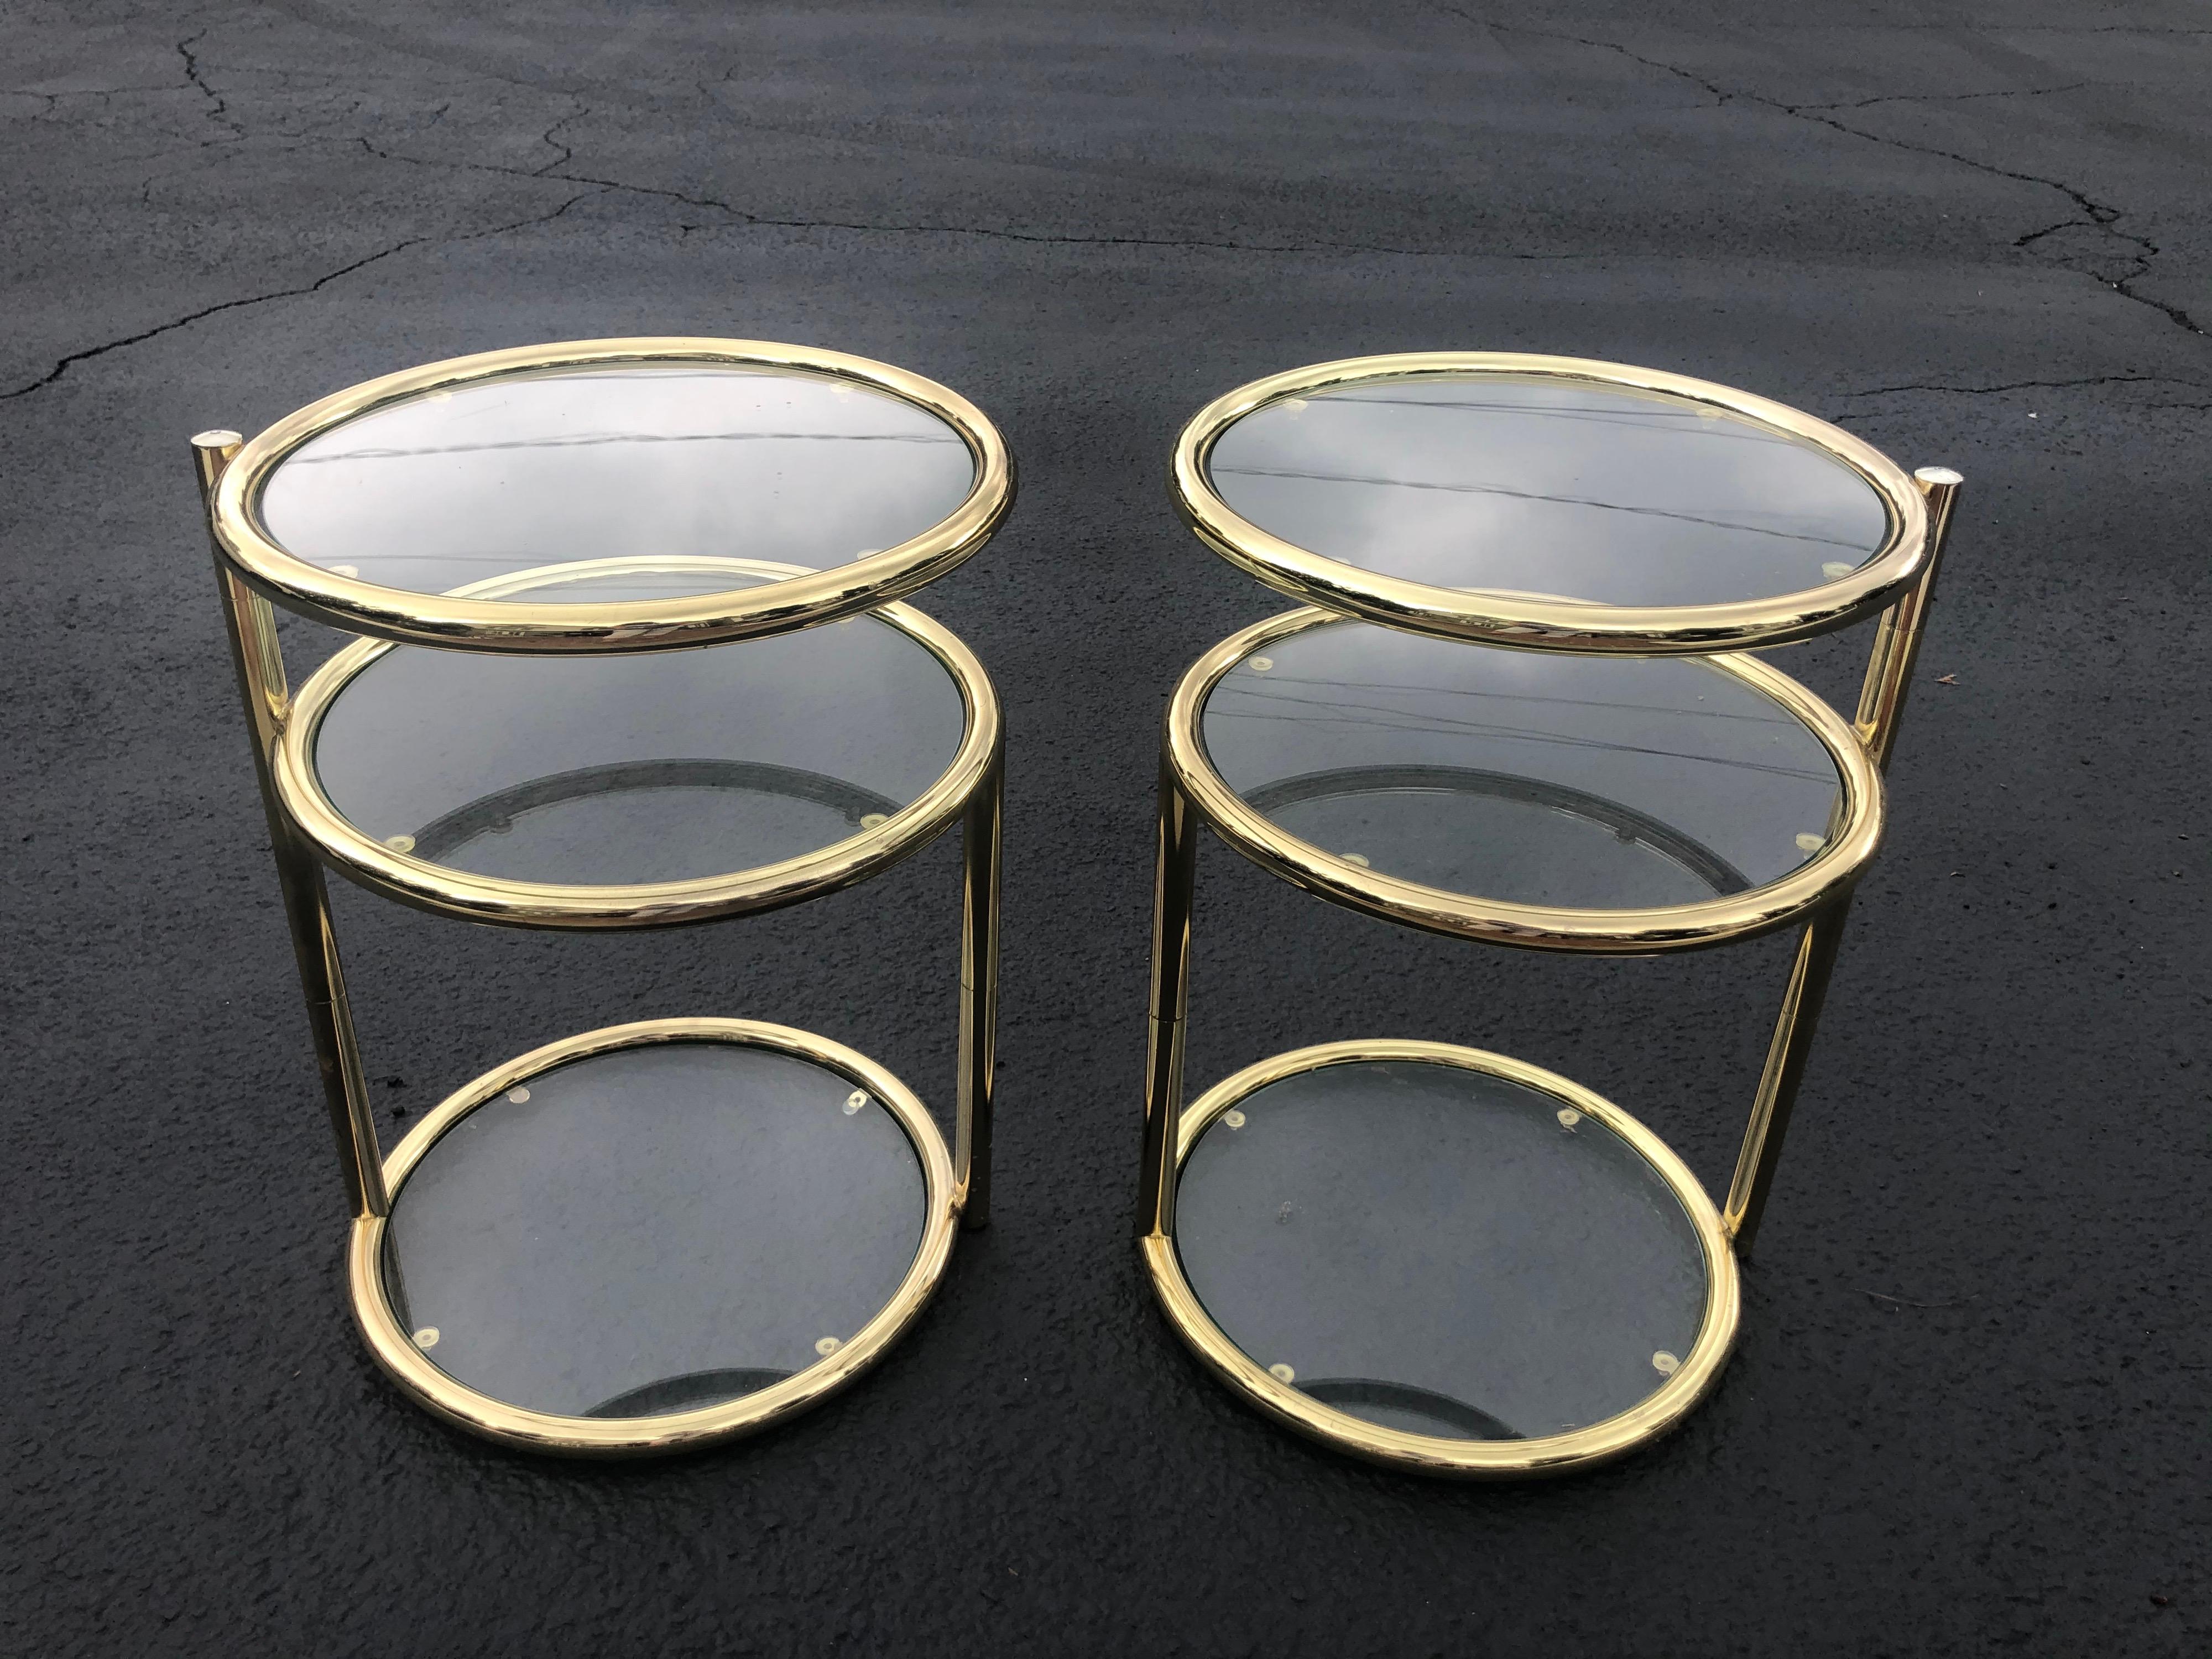 Pair of Swivel brass and glass end tables. Retro three tier side tables that can expand to be wider. Price is for the pair of 2 total. 
White glove is recommended for these table. Parcel shipping is not recommended due to fragility and moving parts.